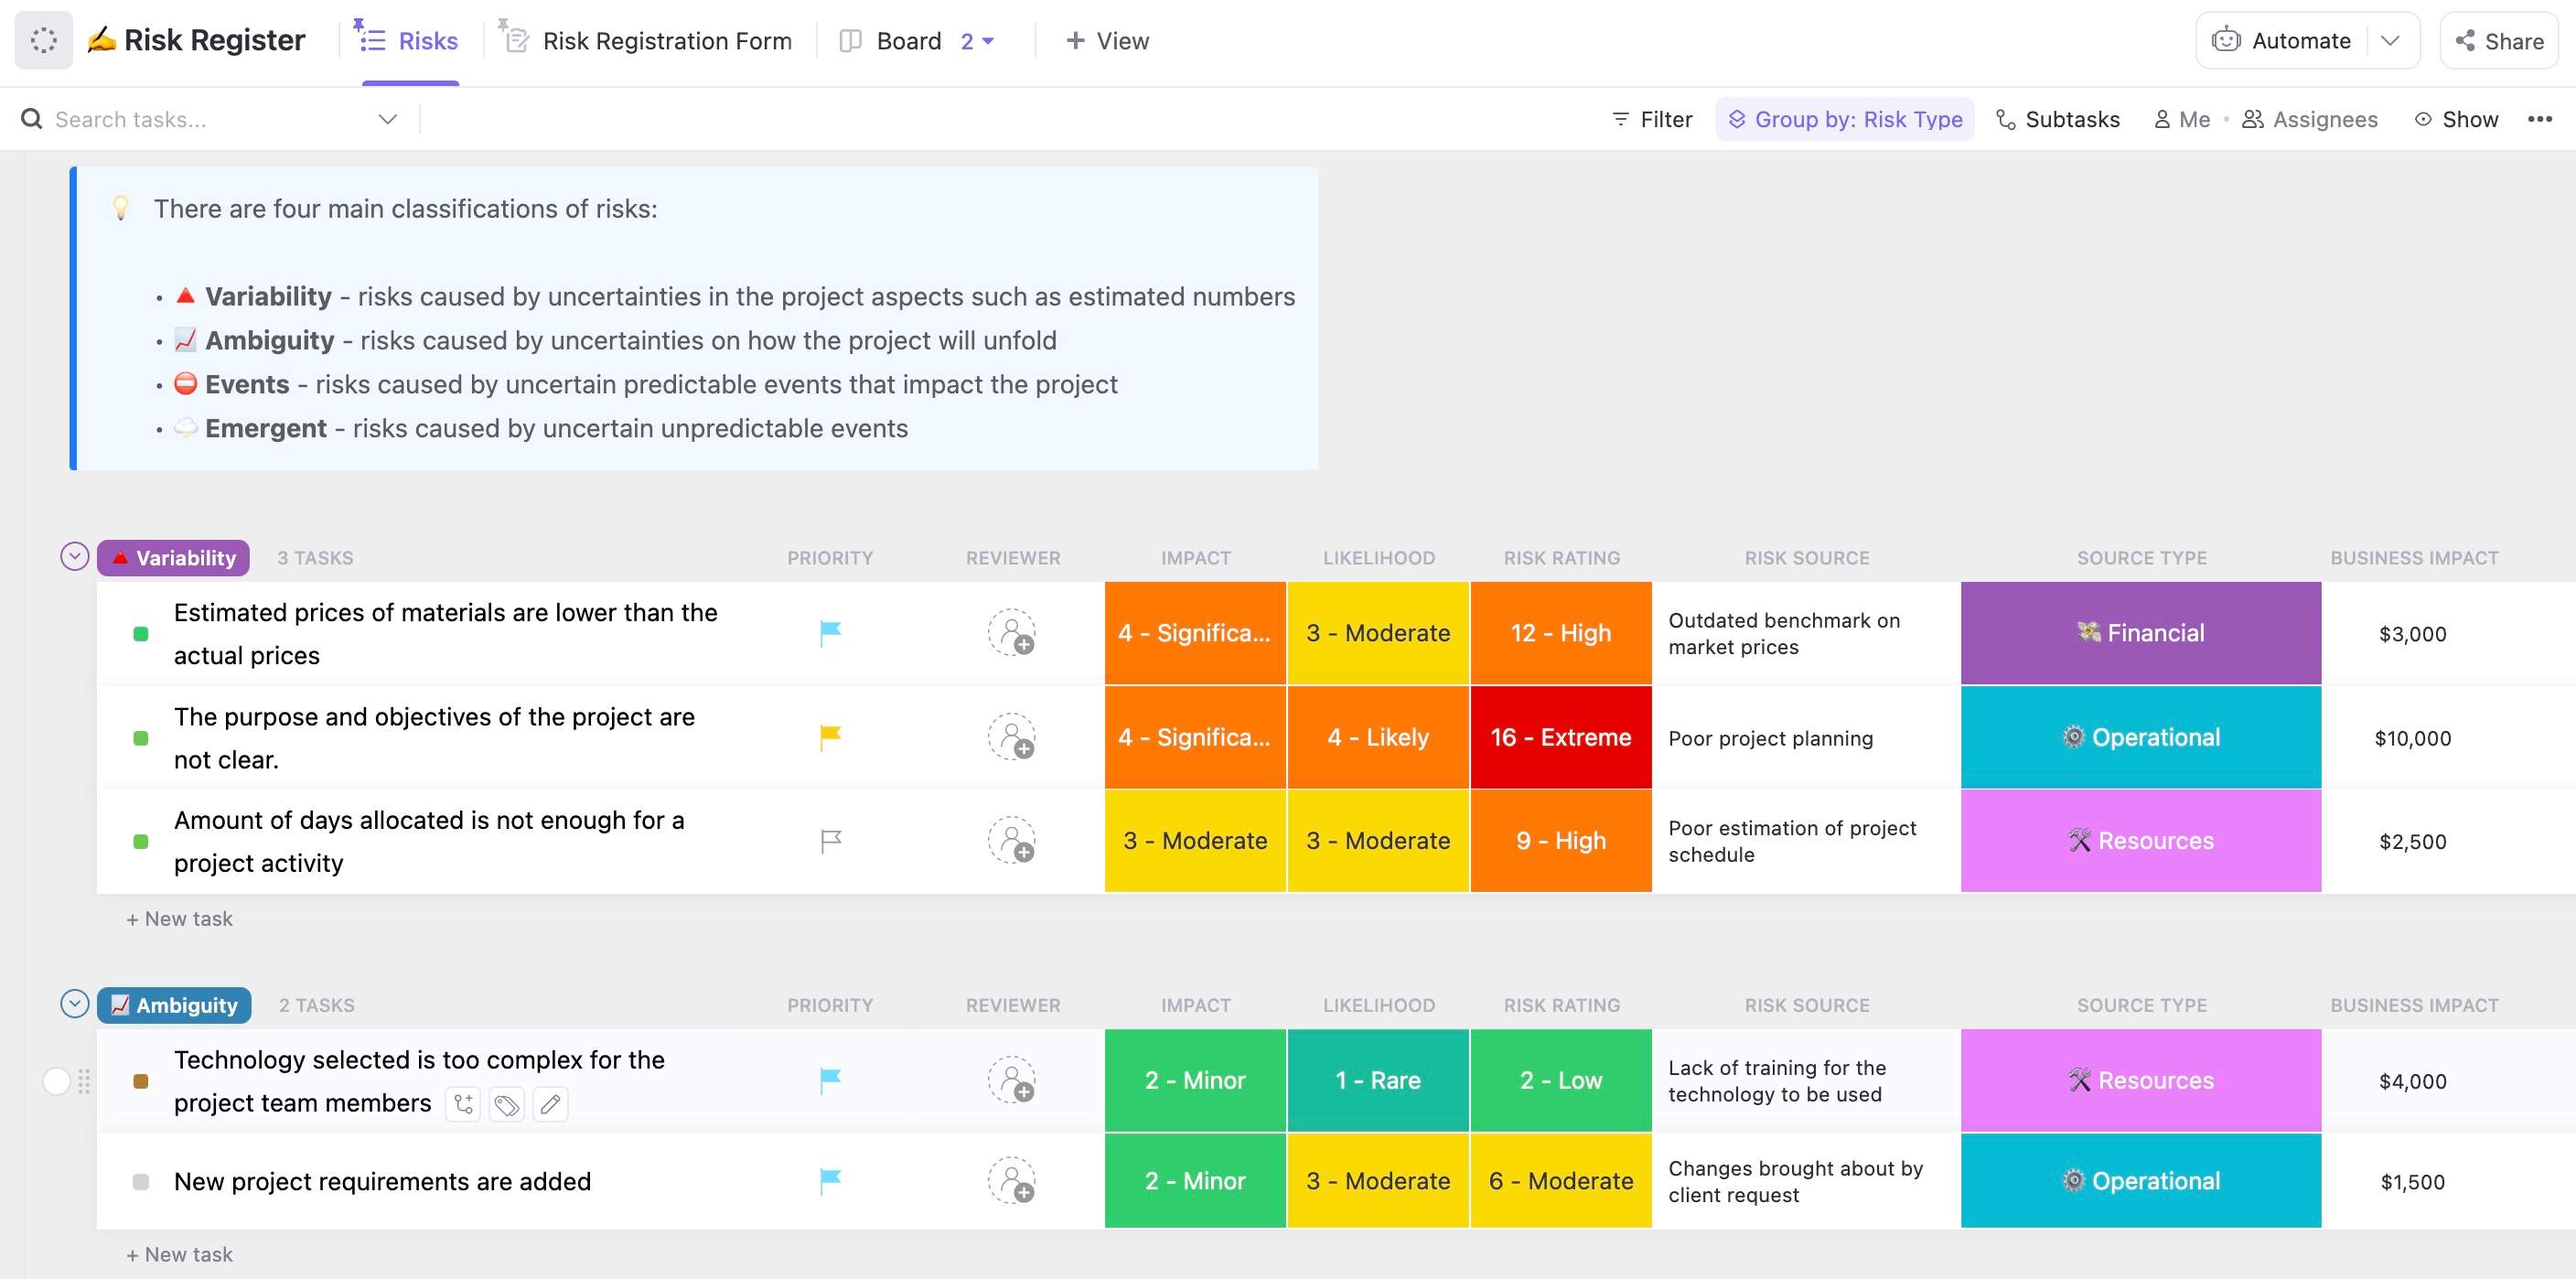 To effectively execute a project, risks should be accounted for. This ClickUp Project Management Risk Analysis template helps project managers analyze project risks and provide appropriate mitigation actions.